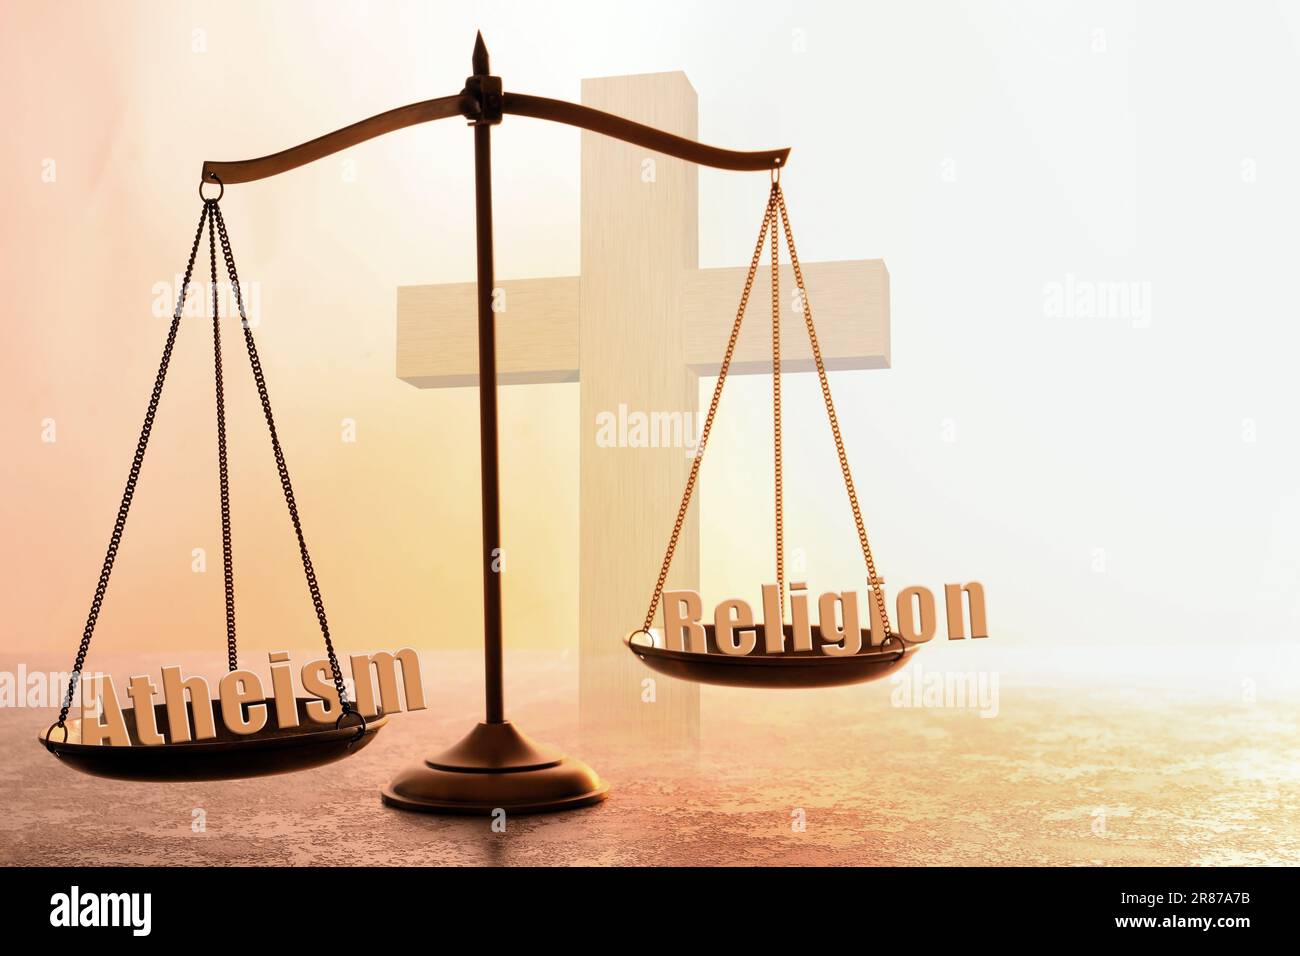 Choice between atheism and religion. Scales with words on textured surface against cross Stock Photo